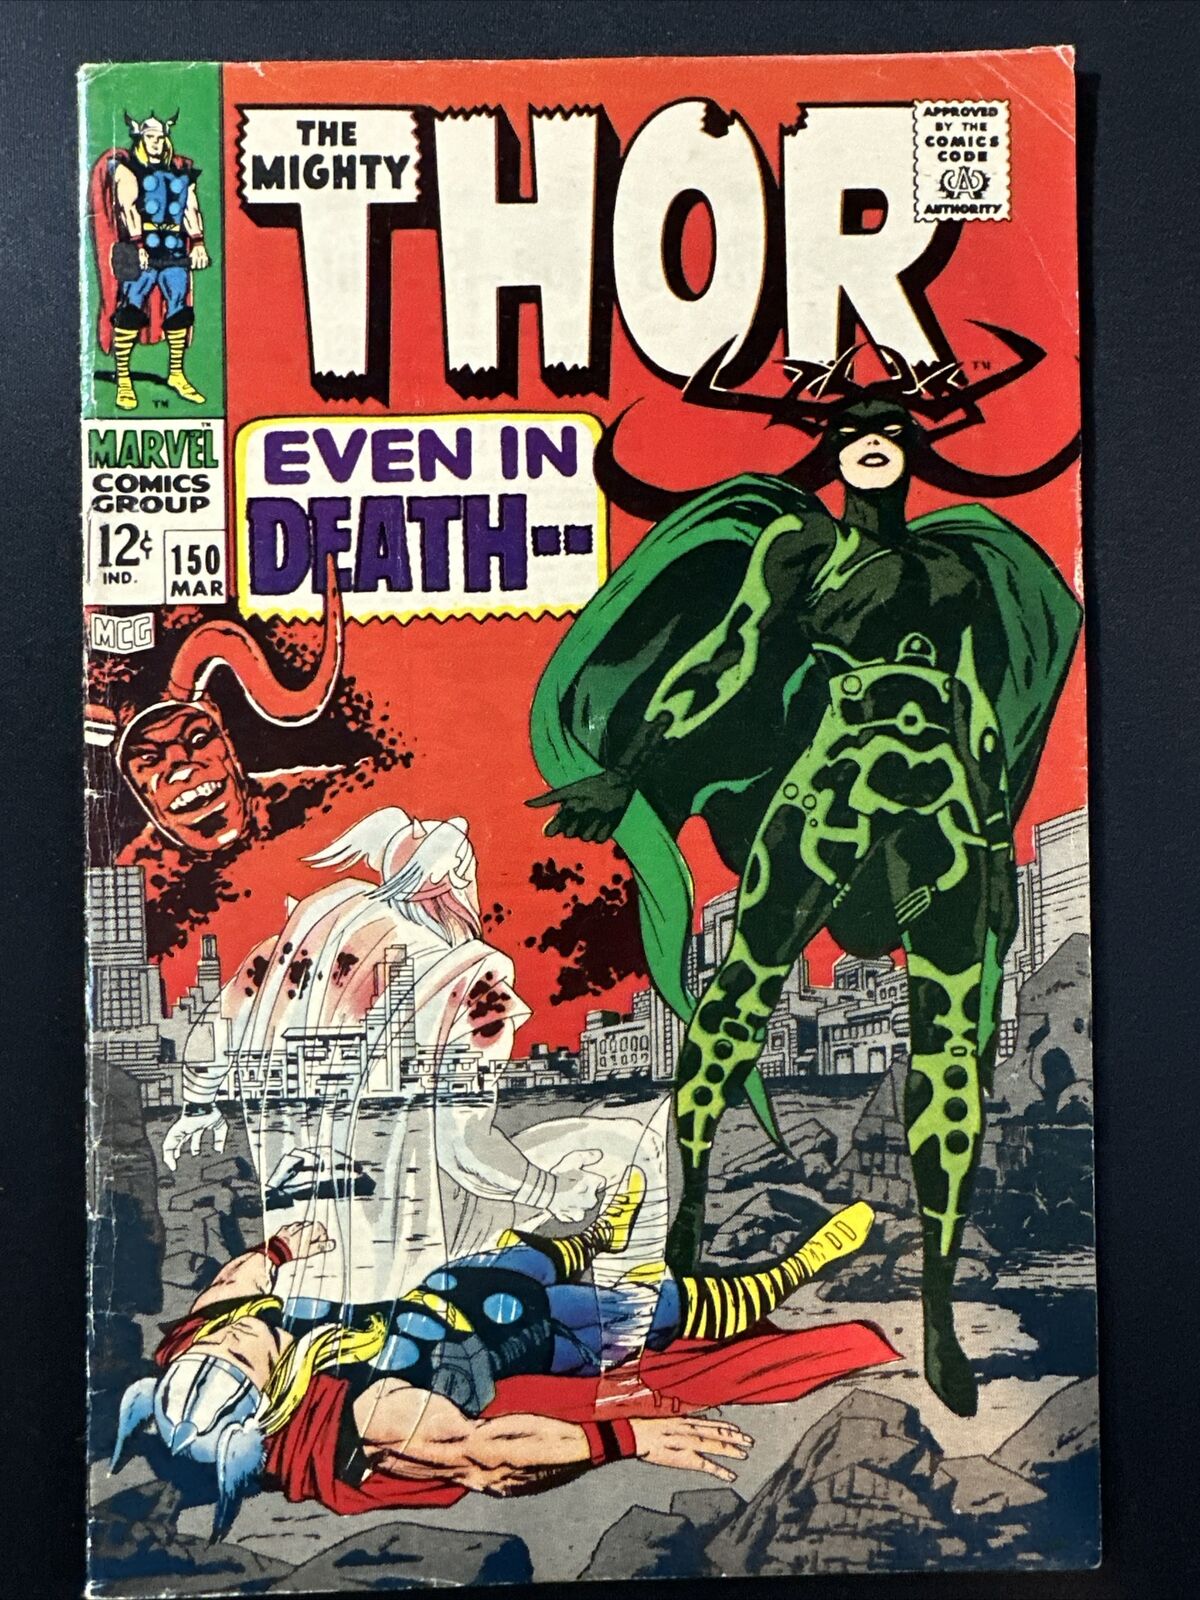 The Mighty Thor #150 Vintage Marvel Comics Silver Age 1st Print 1967 VG *A2